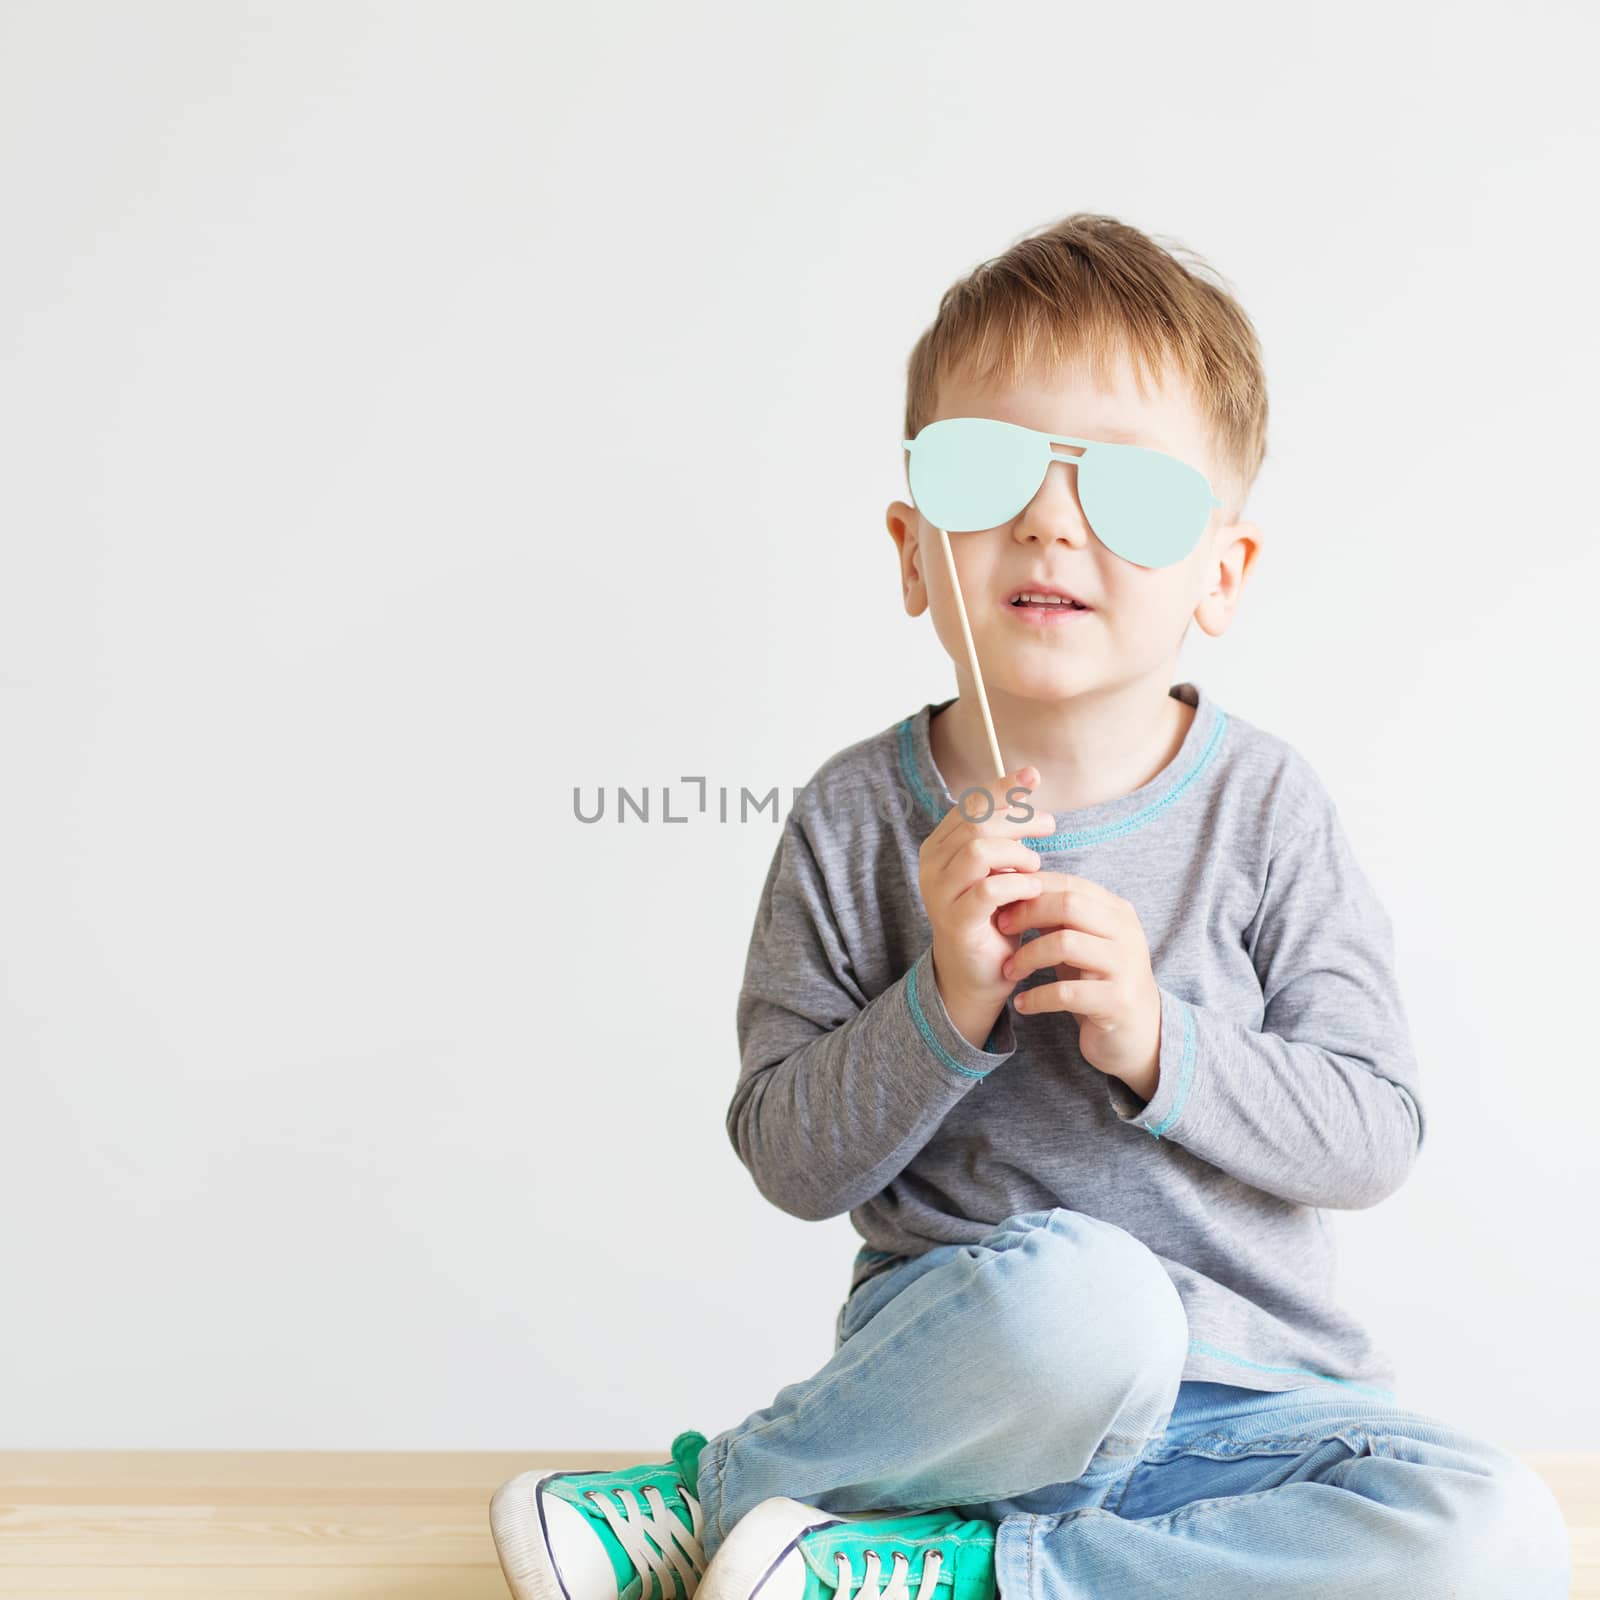 Portrait of a adorable little kid with blue paper glasses against a white background. A blind child